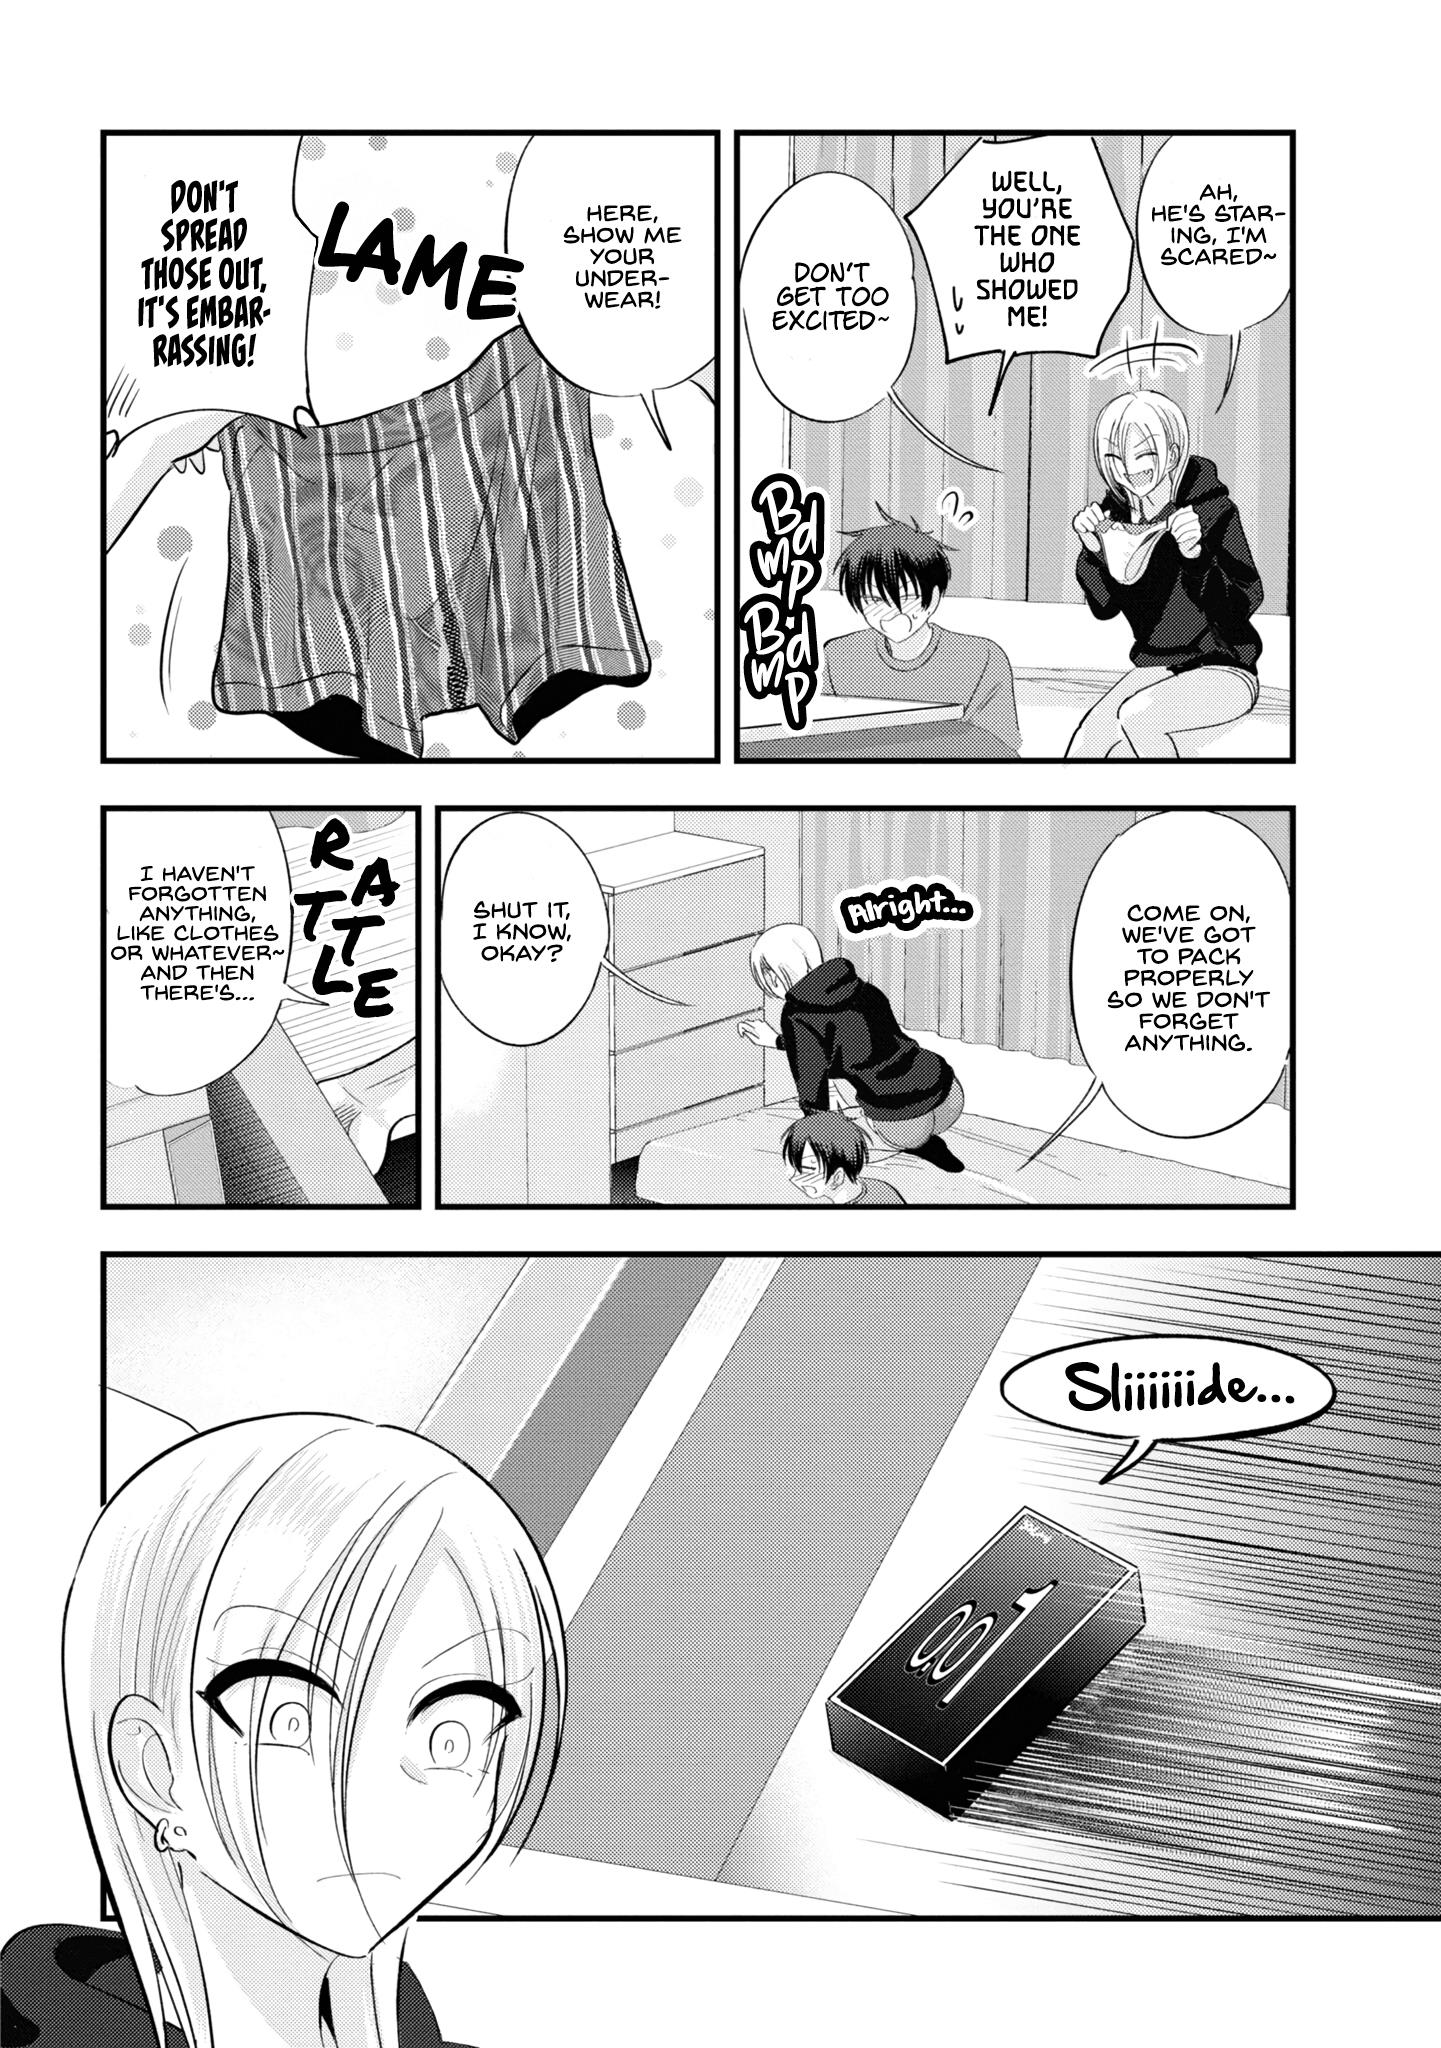 Please Go Home, Akutsu-San! Vol.7 Chapter 141.2: Extra 2 - Picture 2